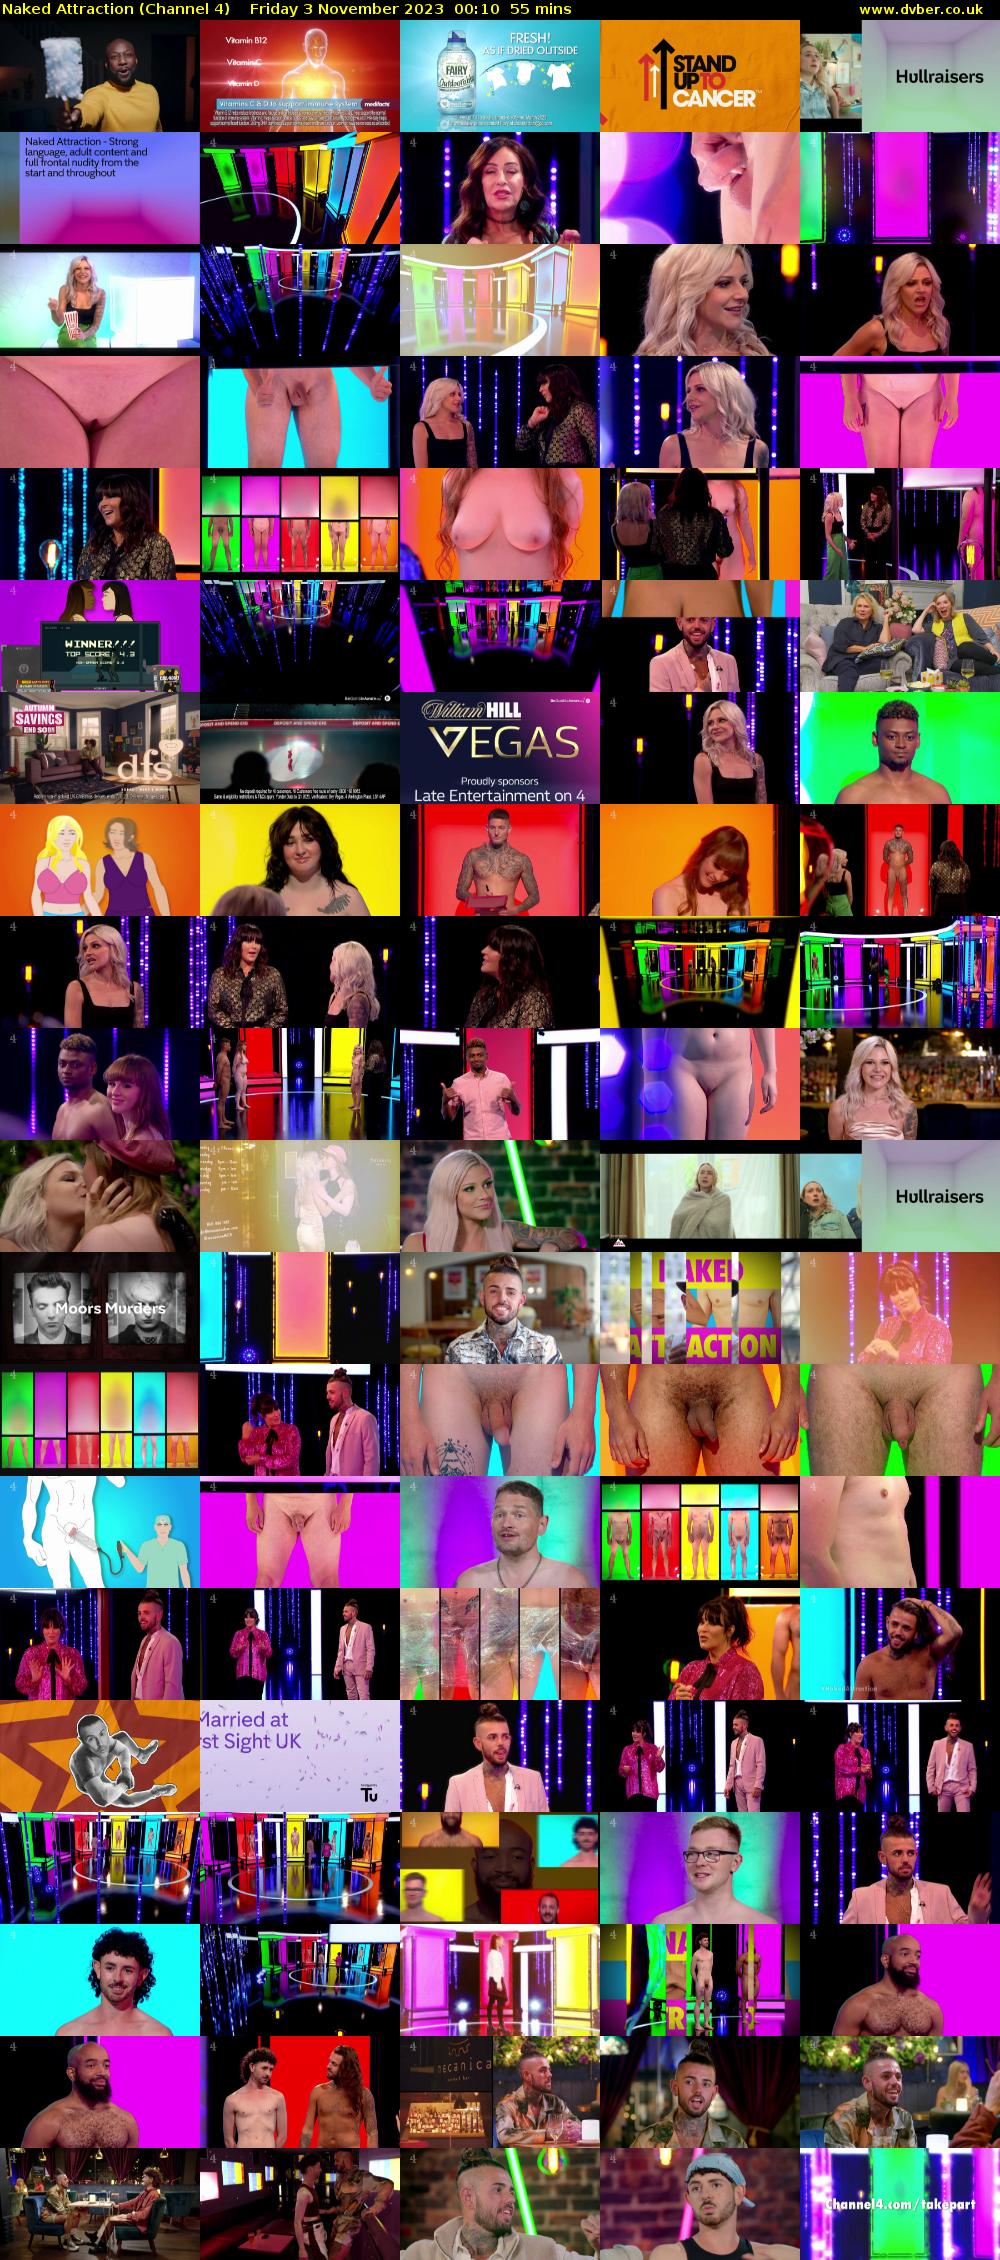 Naked Attraction (Channel 4) Friday 3 November 2023 00:10 - 01:05